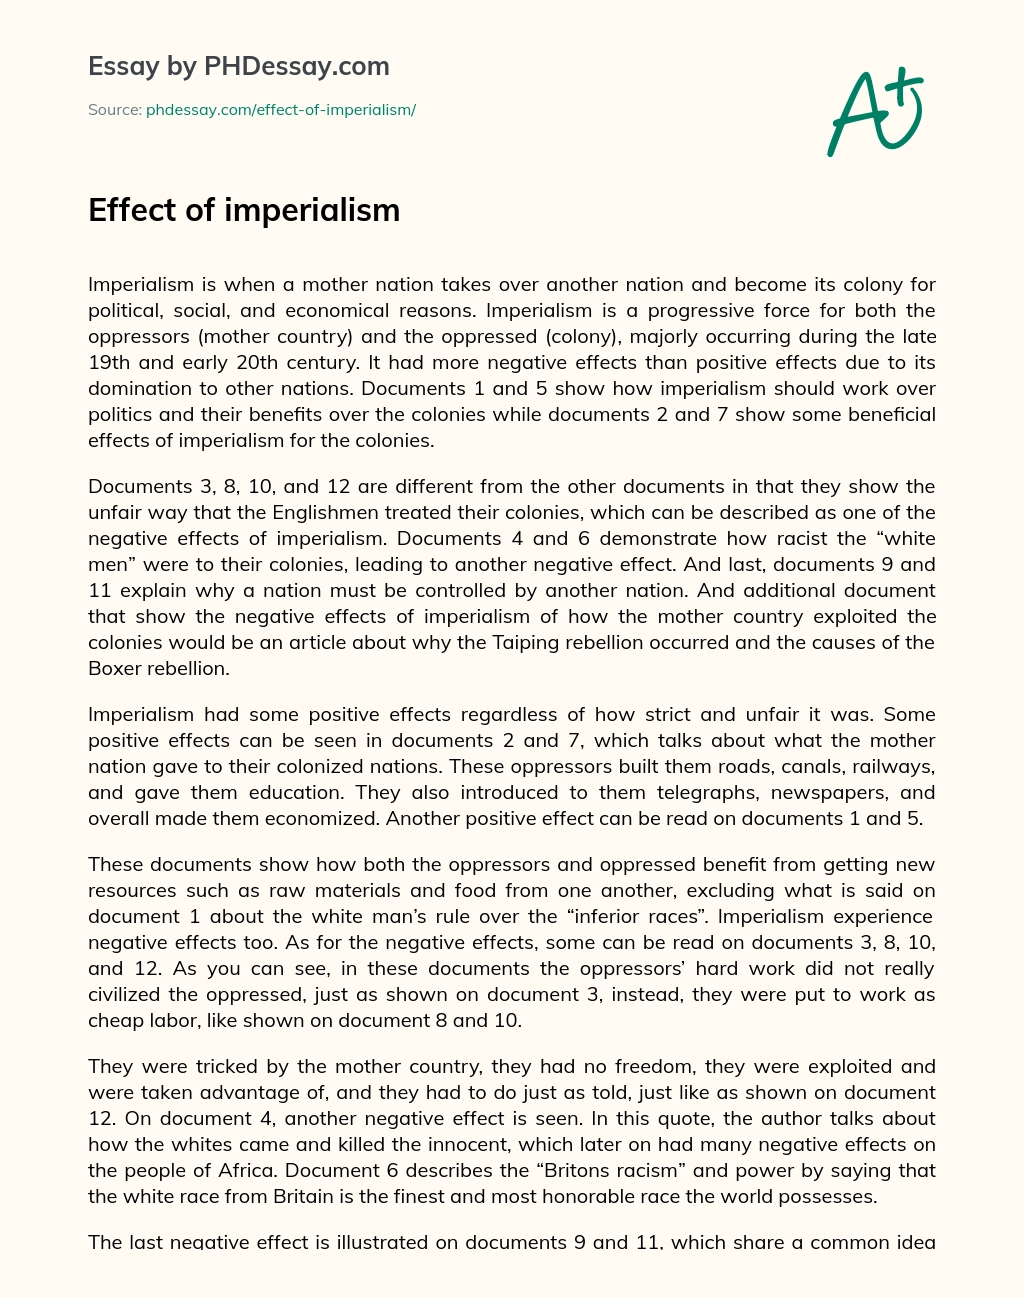 Effect of imperialism essay